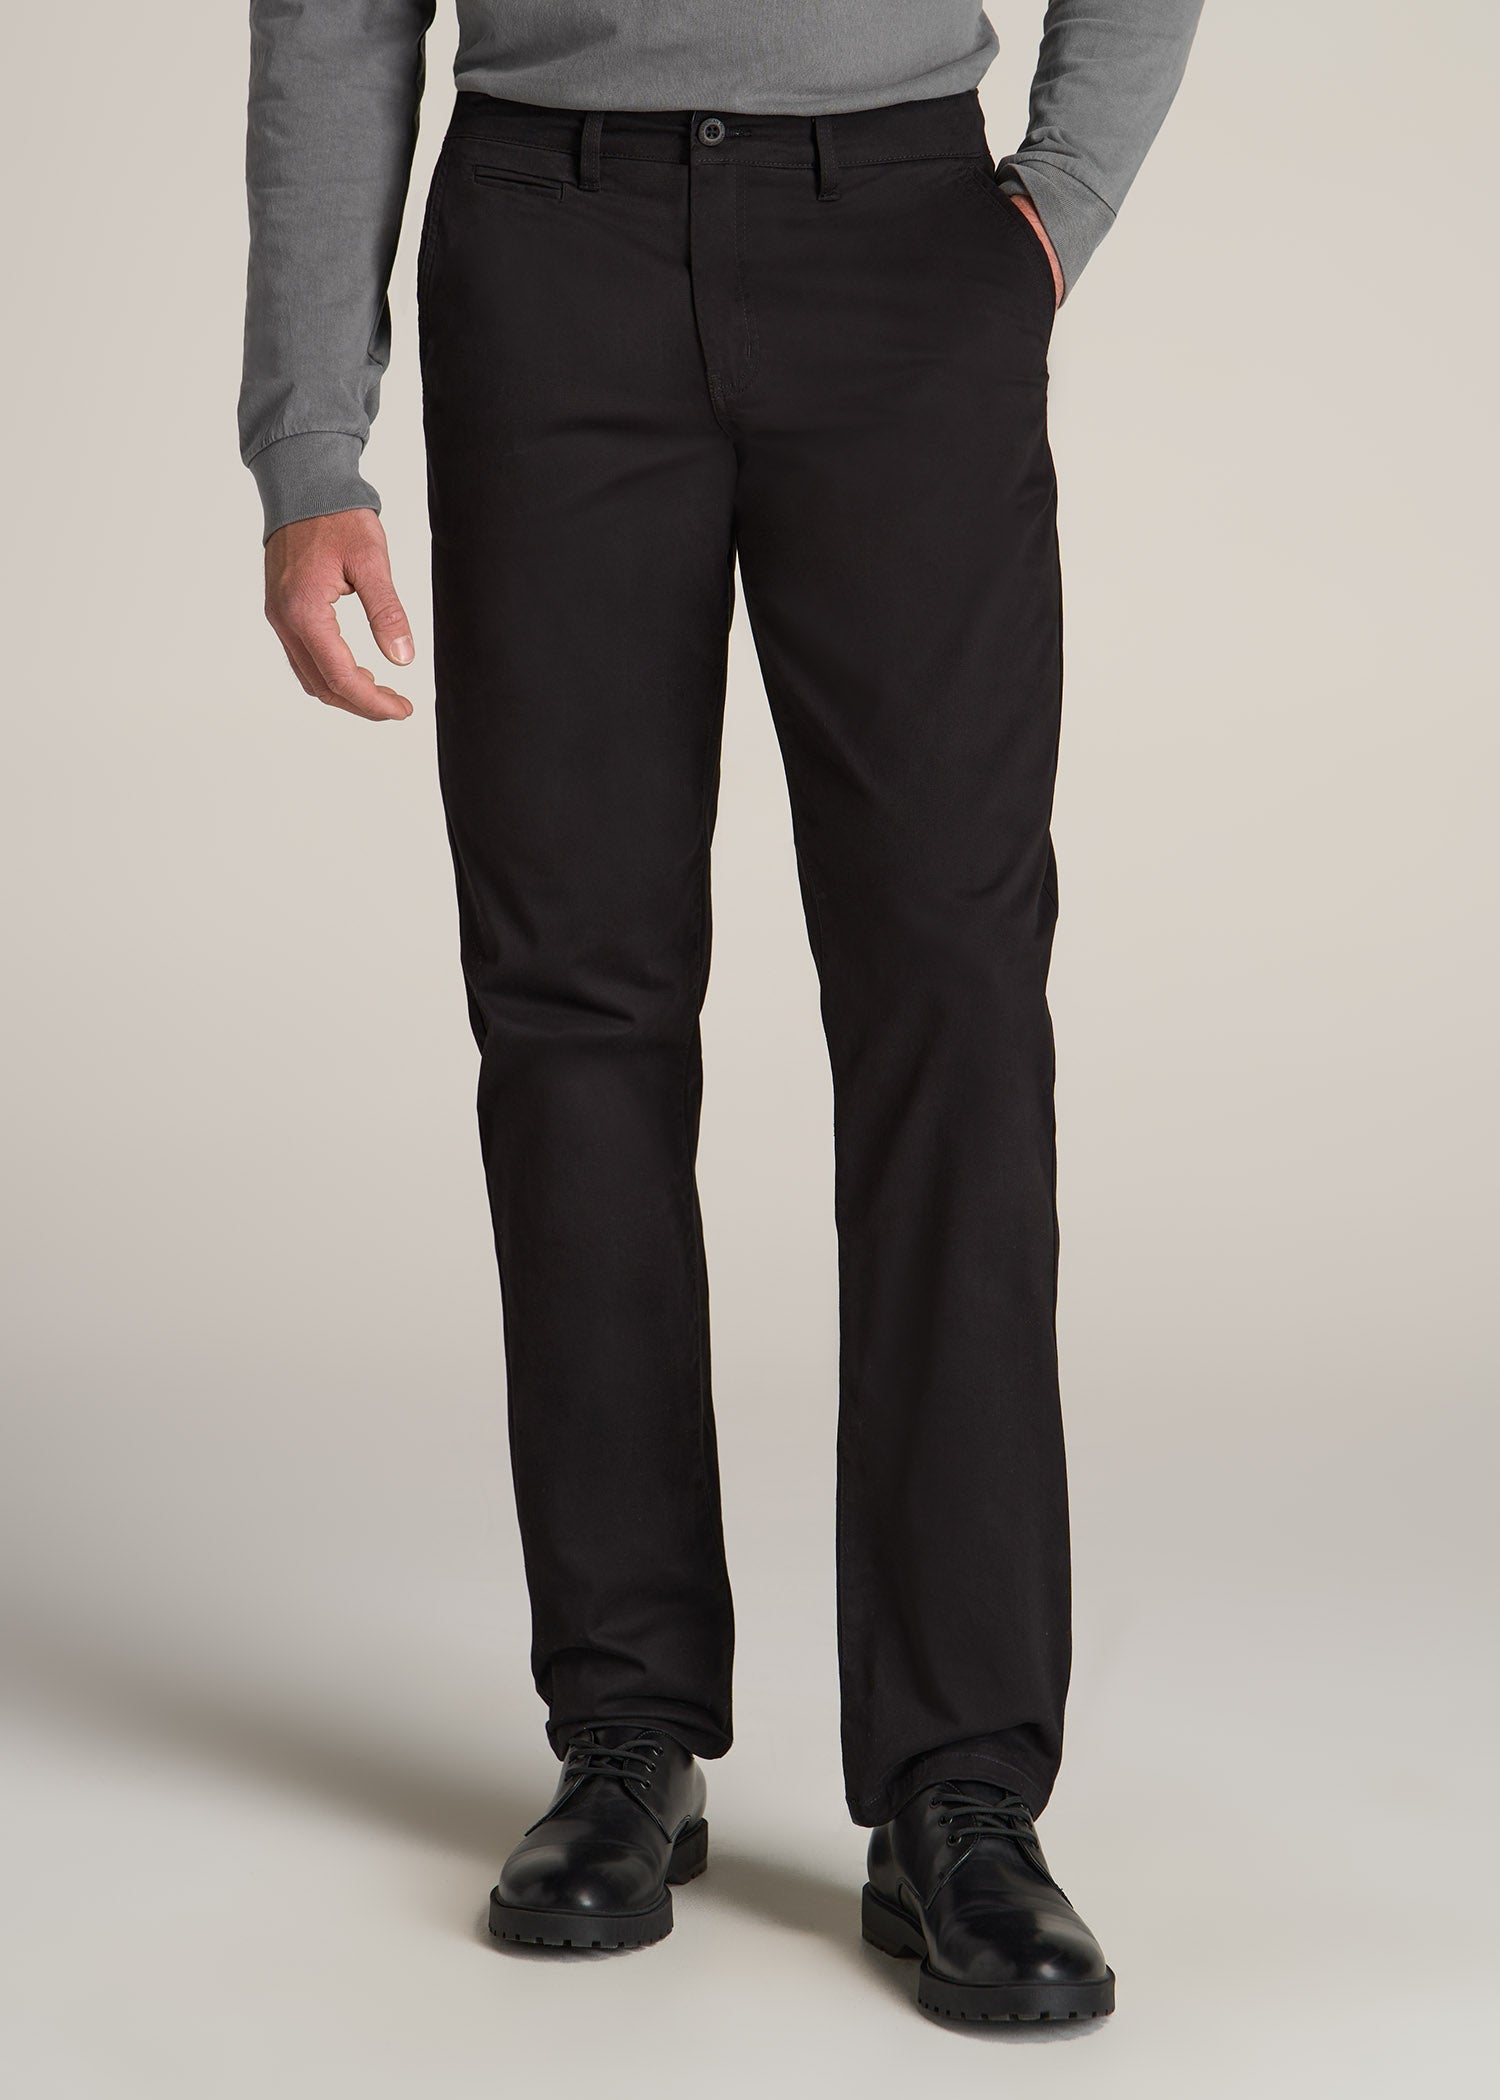 American-Tall-Men-J1-Straight-Fit-ChinoPant-Black-Front